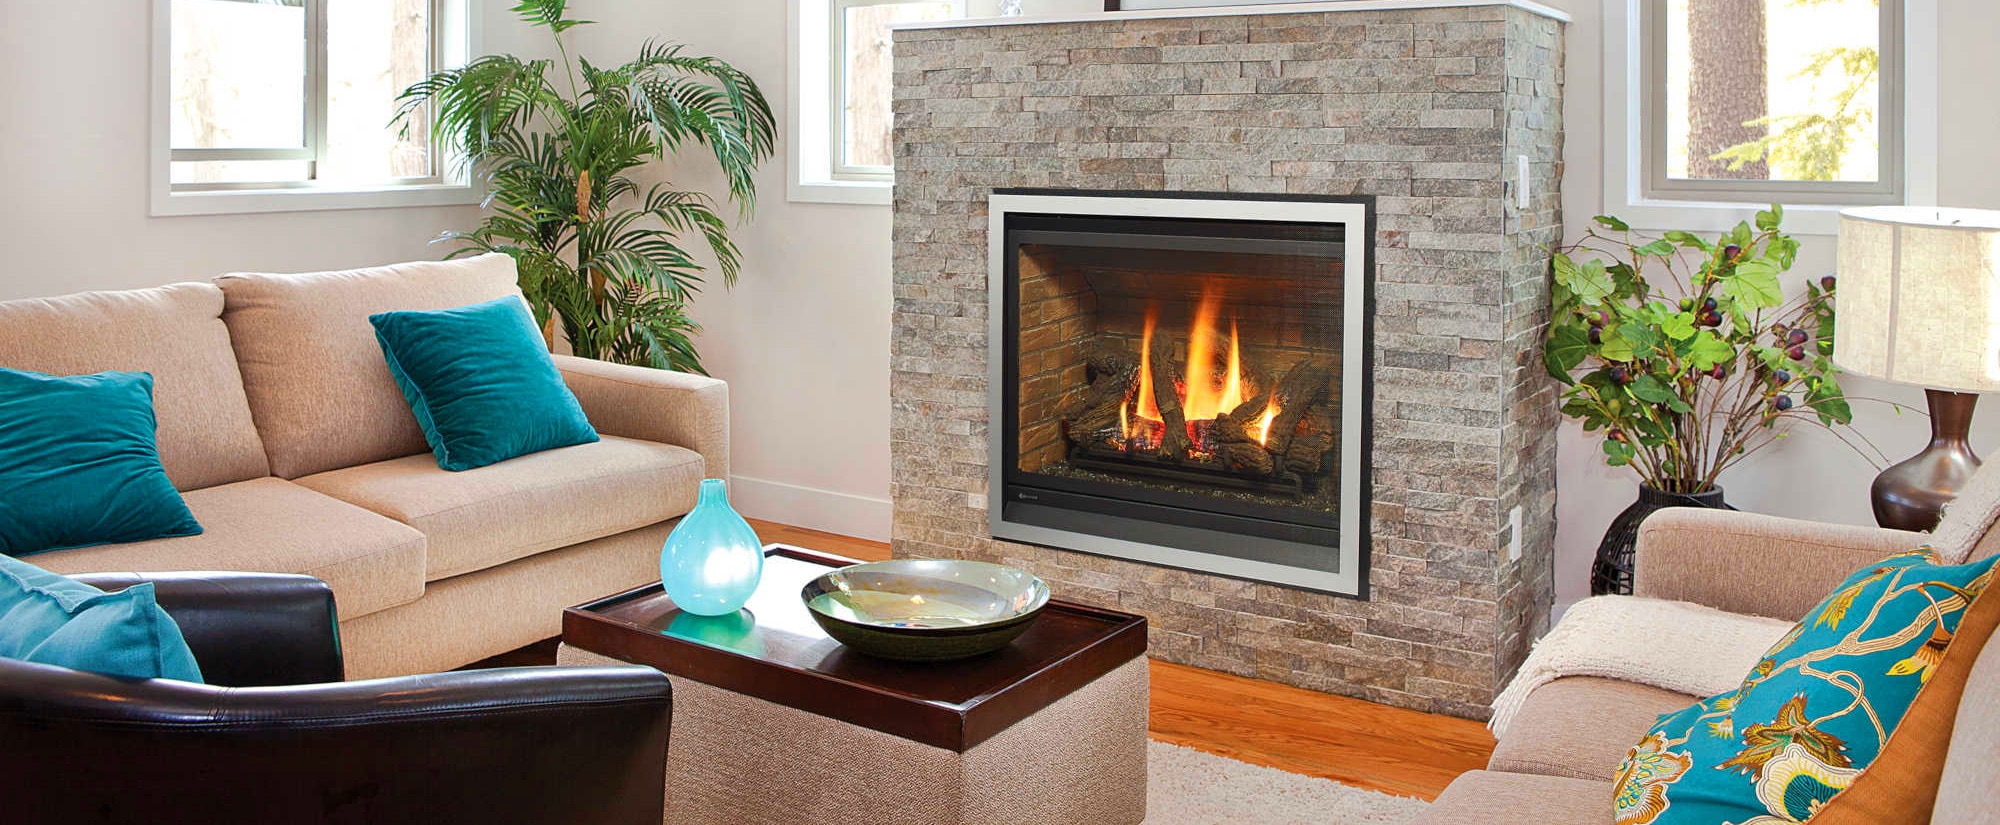 9 Best Direct Vent Gas Fireplaces - No More Harmful Gases in Your Home!